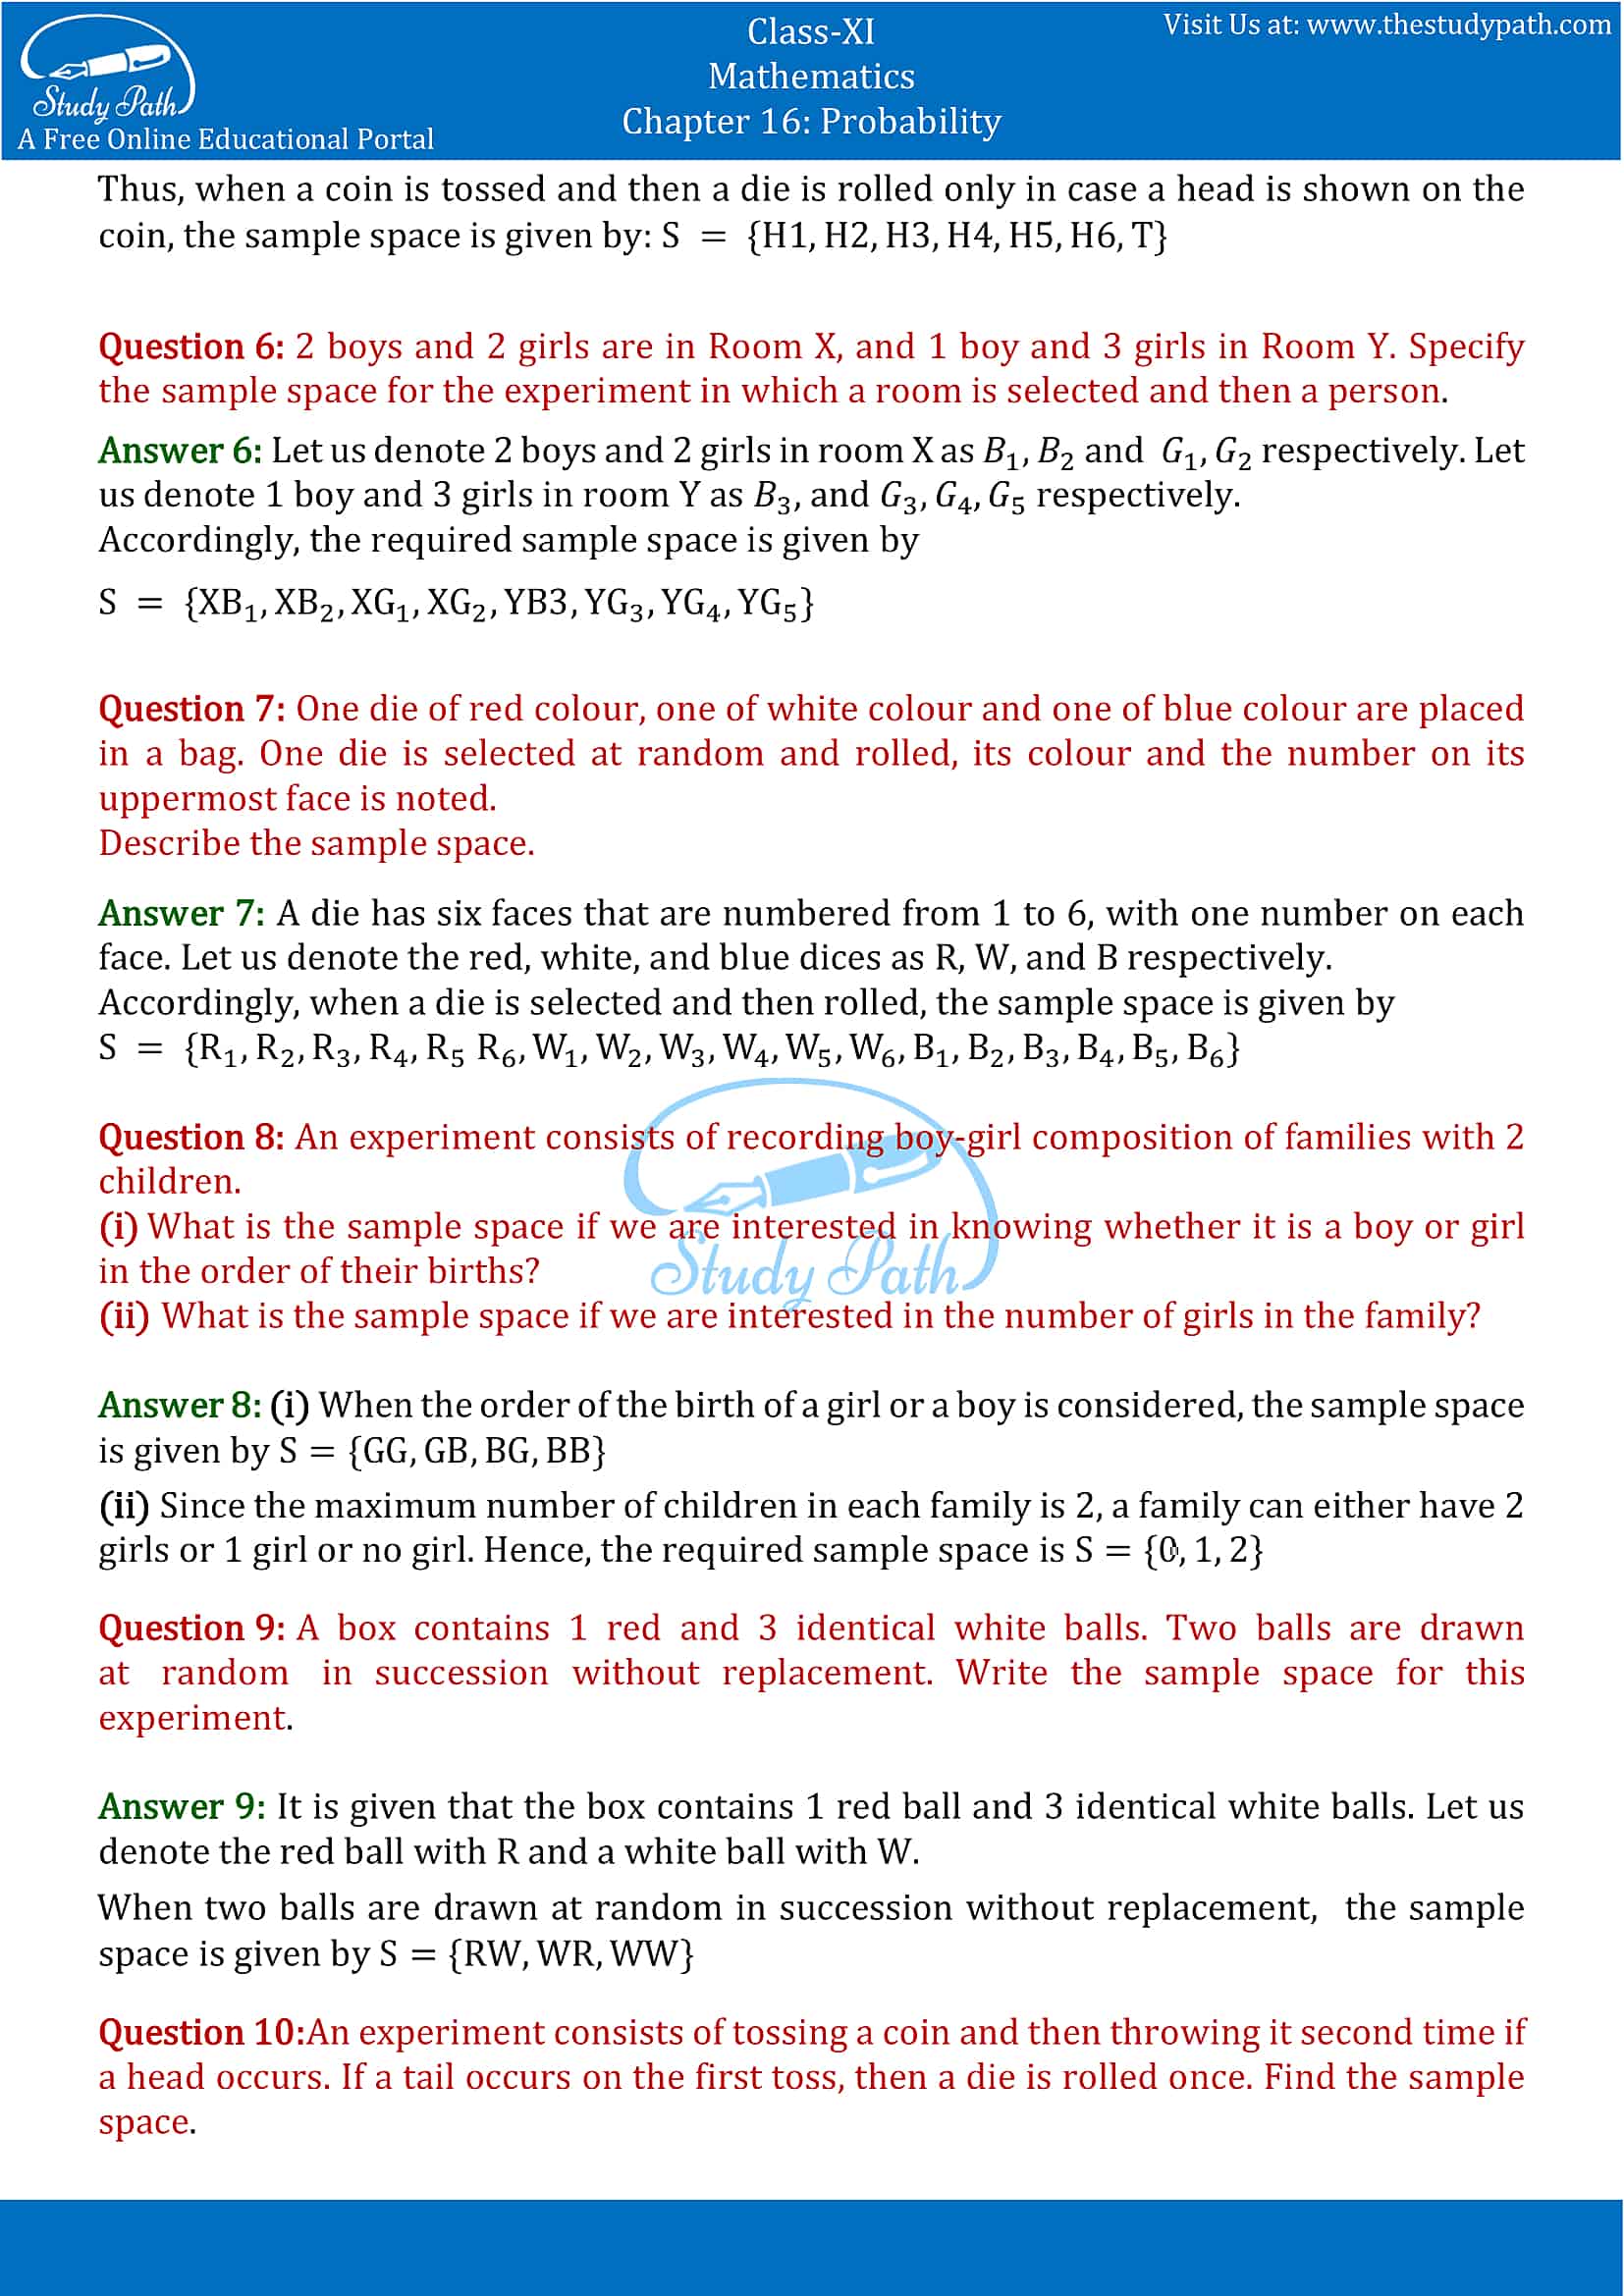 NCERT Solutions for Class 11 Maths chapter 16 Probability Exercise 16.1 part-2